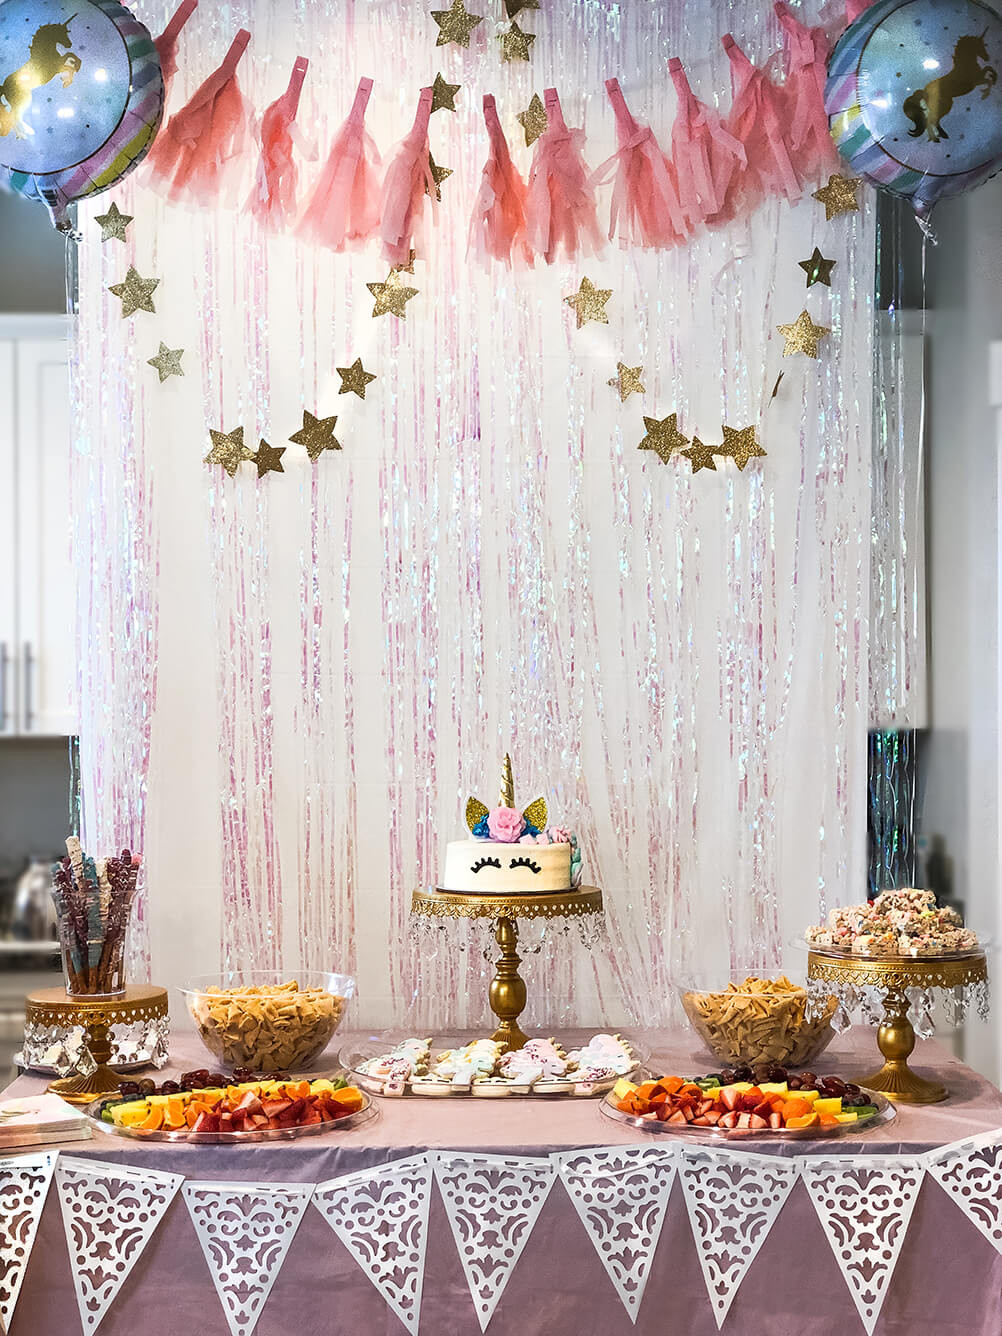 Unicorn Party Theme Food Ideas
 15 Unicorn Birthday Party Food Ideas Parties With A Cause